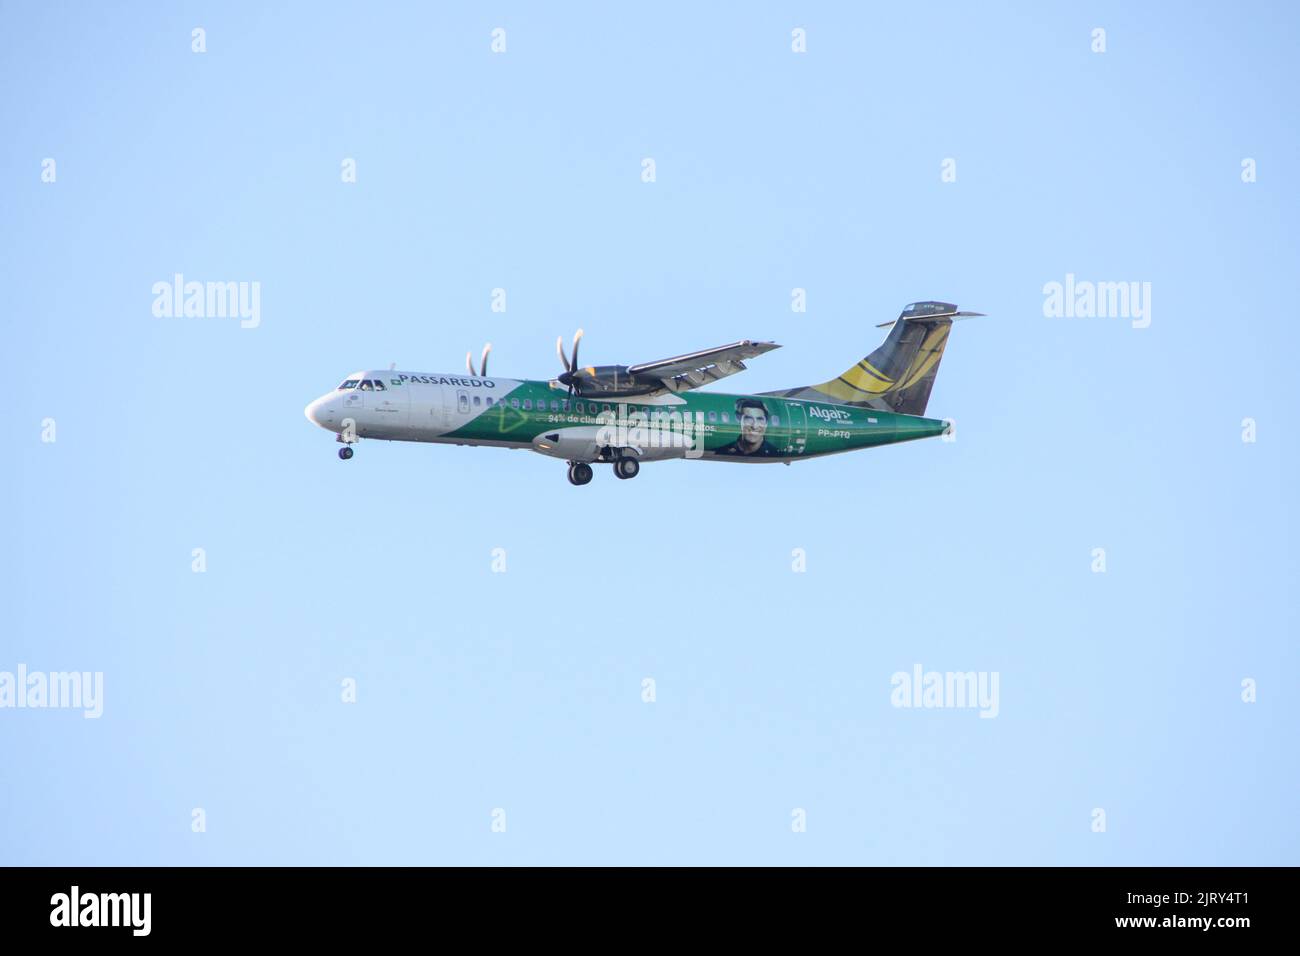 Airplane approaching the Santos Dumont airport in Rio de Janeiro - January 27, 2019: Plane approaching to land at Santos Dumont airport in Rio de Jane Stock Photo